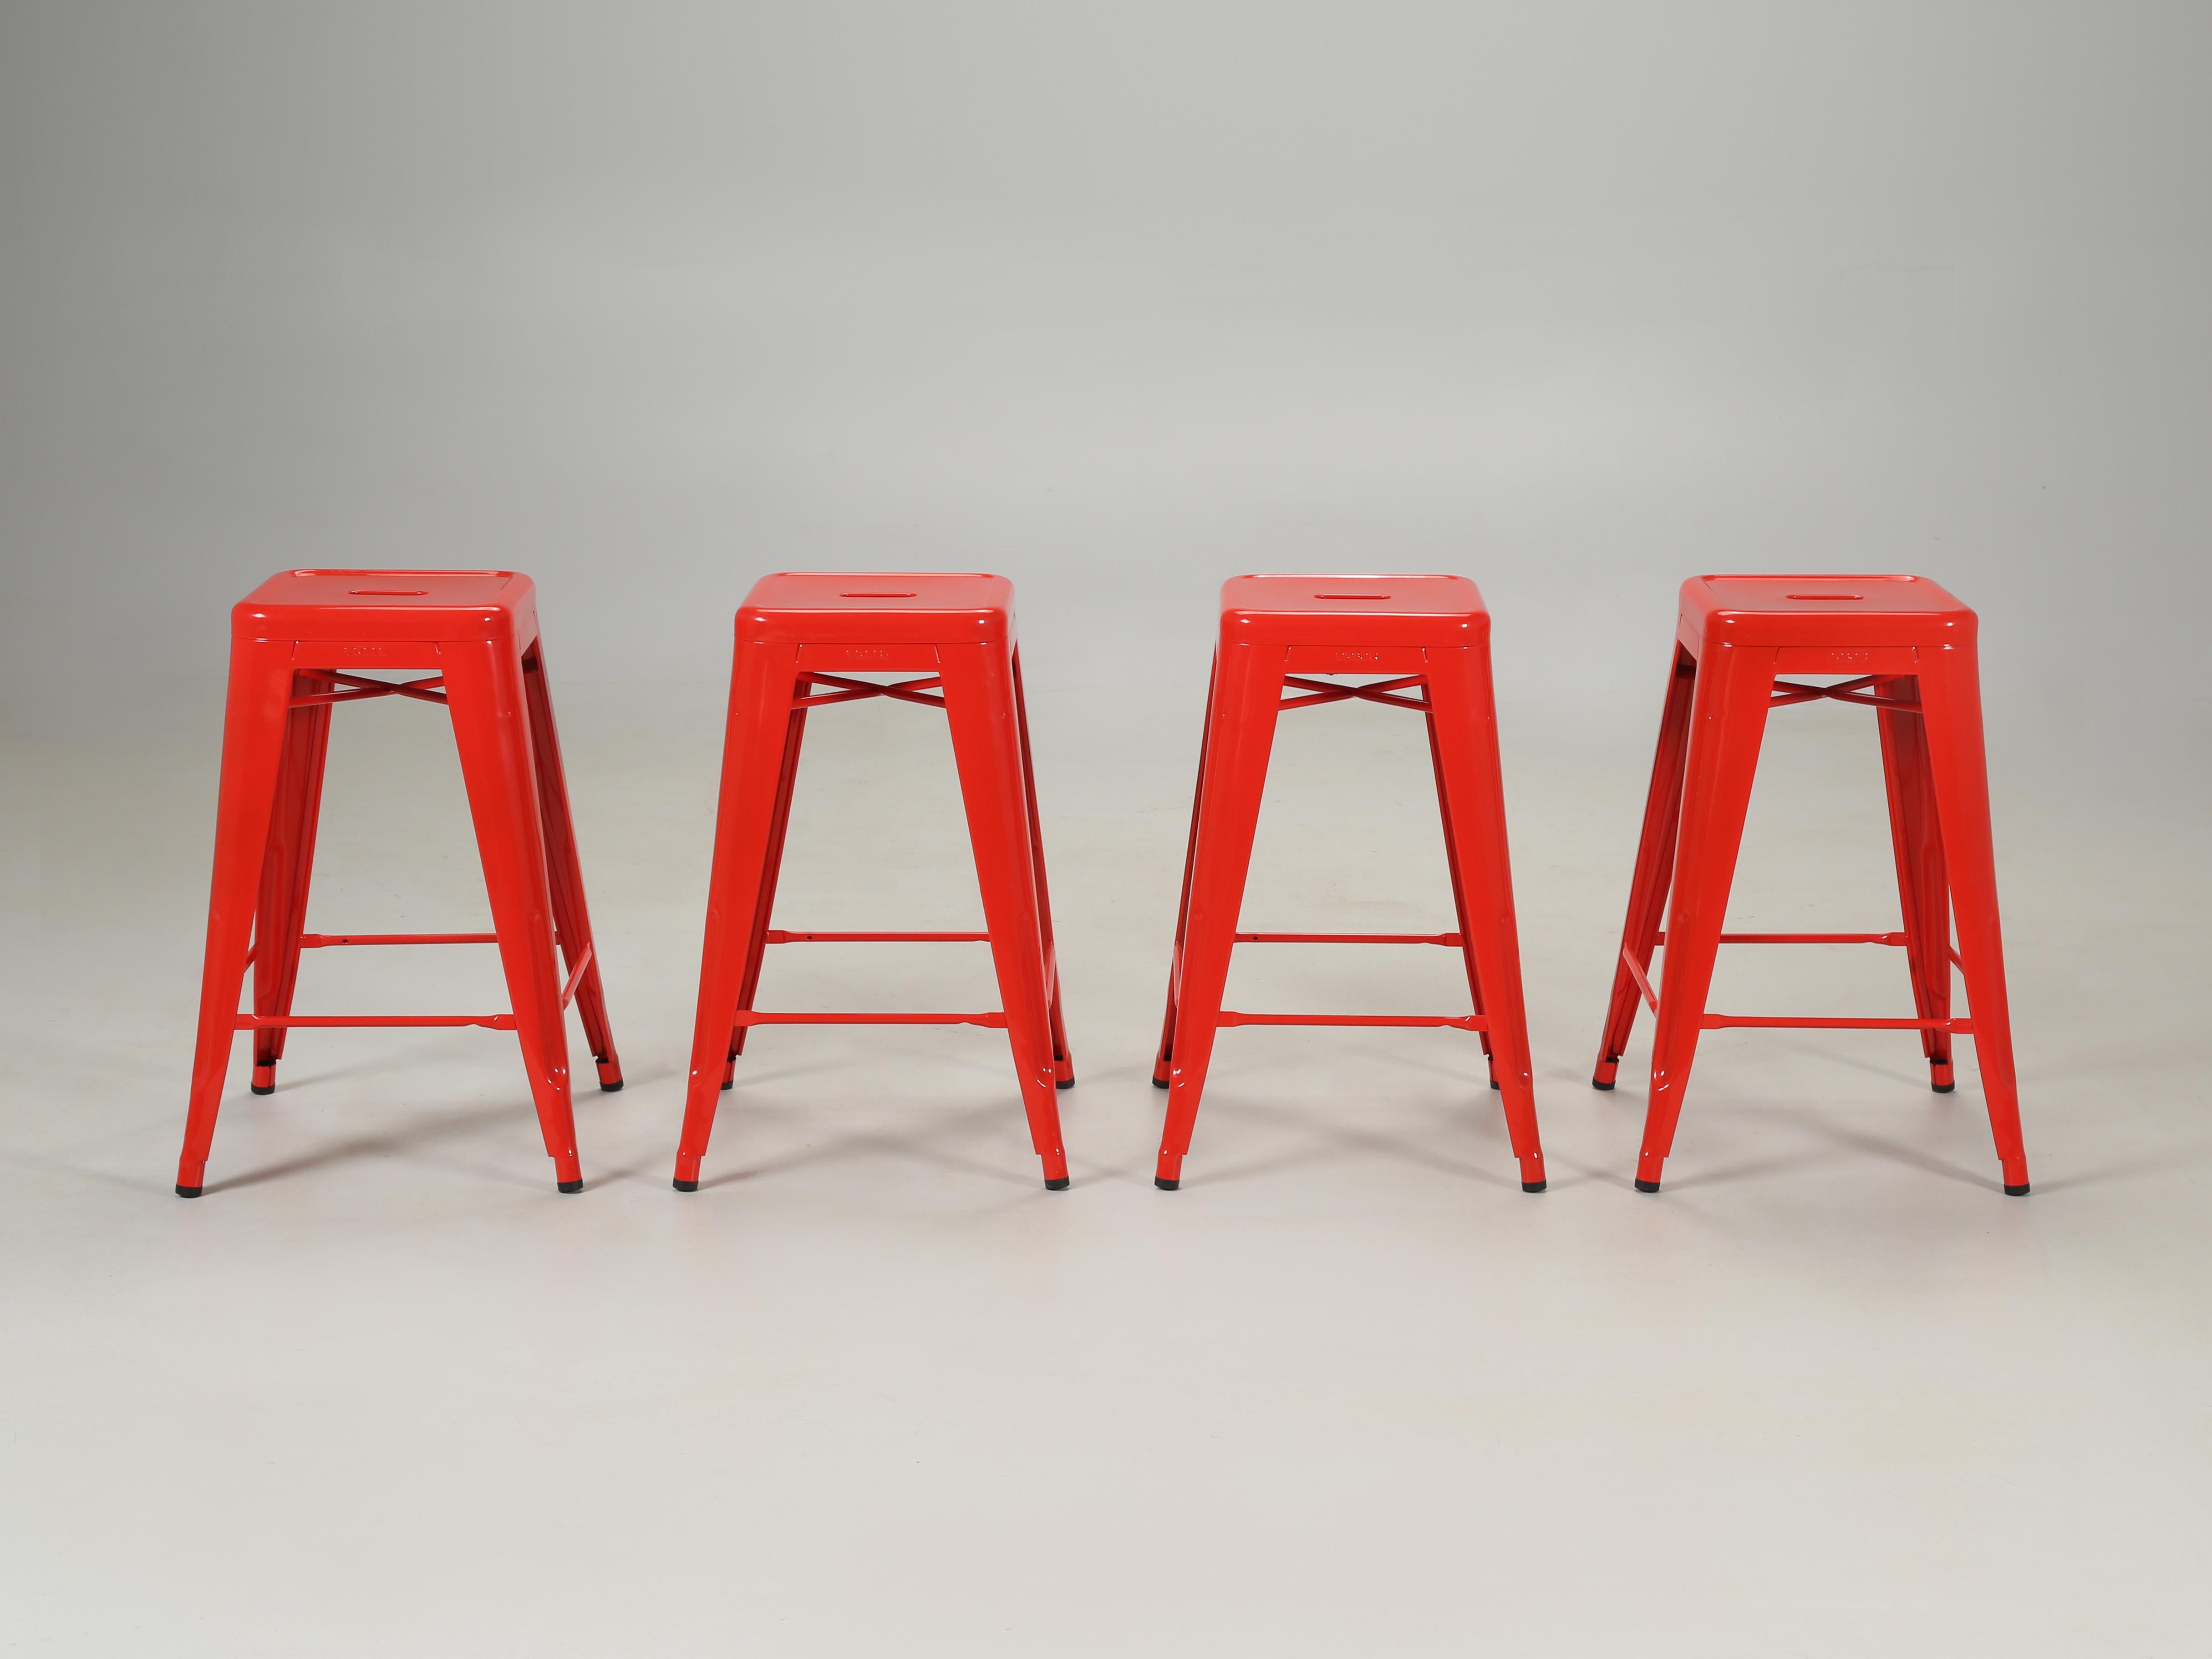 Genuine Tolix steel stacking stools were invented by a roofer in France named Xavier Pauchard. Once the general public realized how convenient it was to be able to stack your stools or chairs, they became an overnight sensation. We stock over (1500)